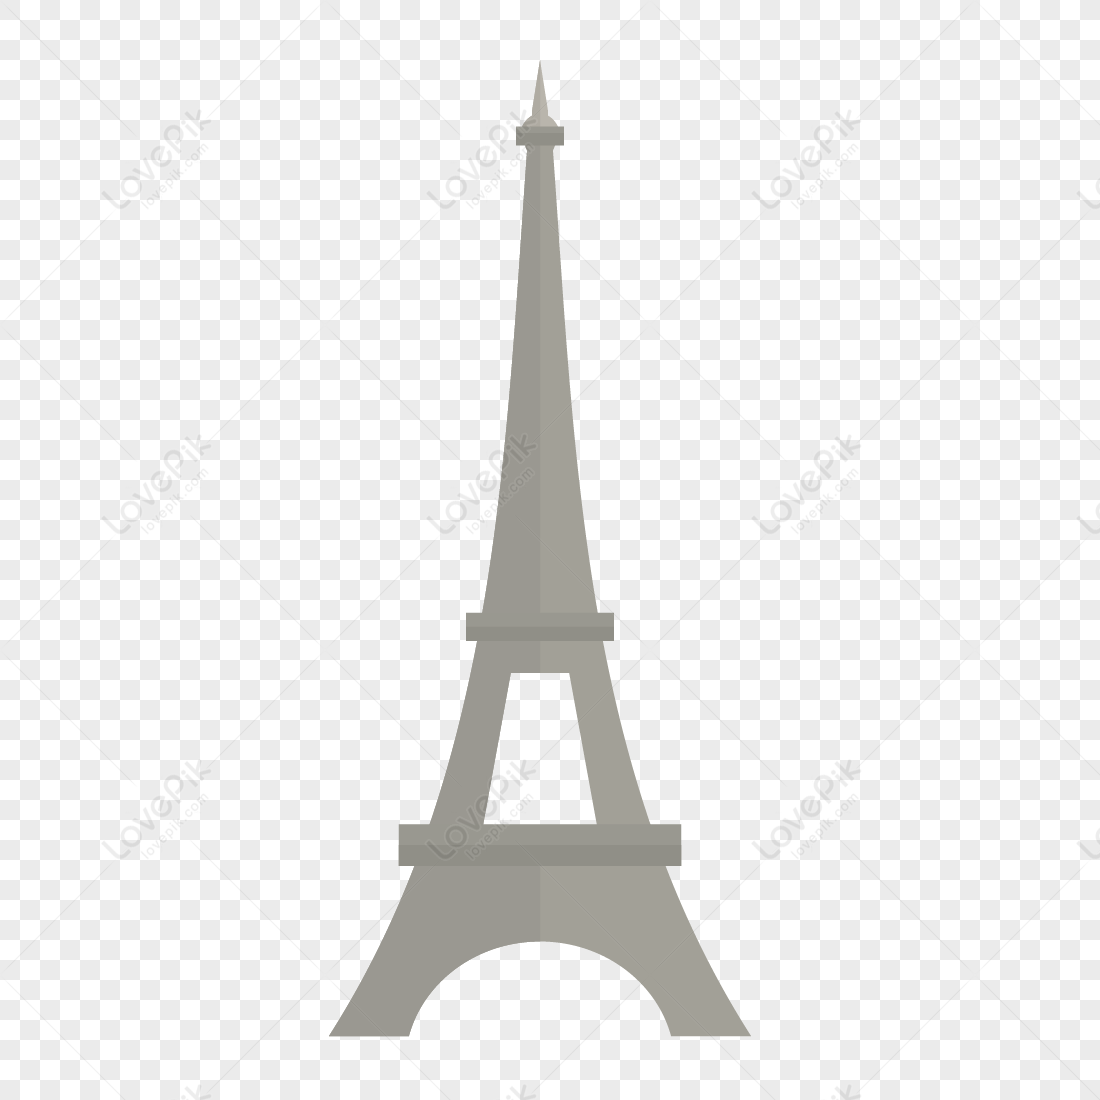 Eiffel Tower, material, eiffel tower, illustration png free download